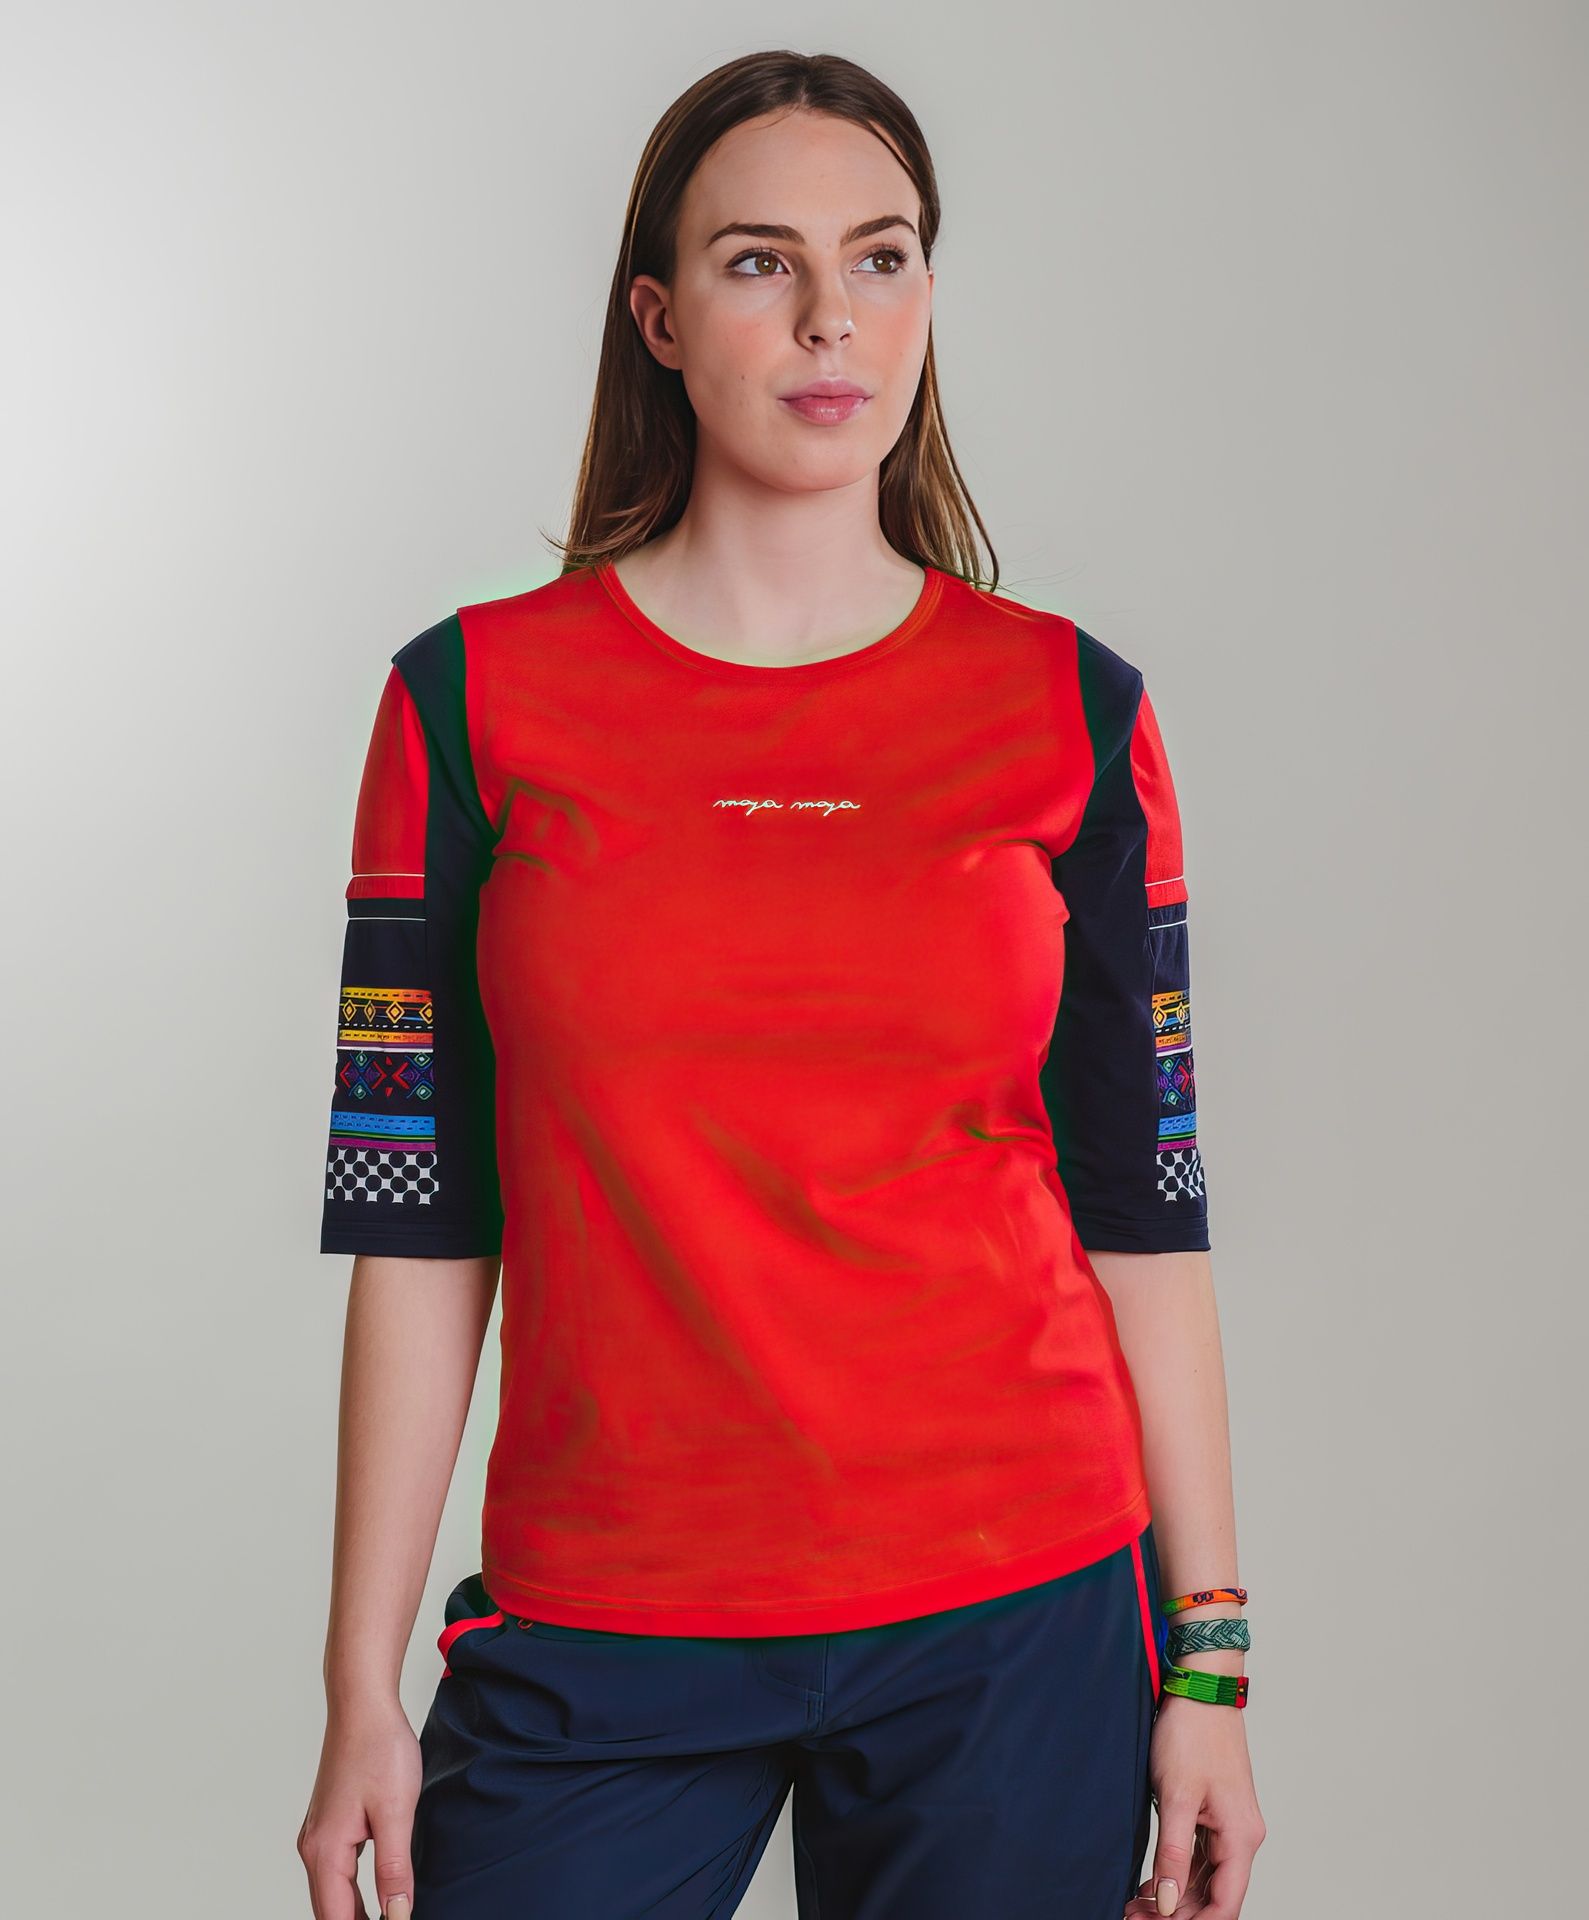 Mayan t-shirt lady in red from MAYA MAYA is a shirt with colourful designs from freetime